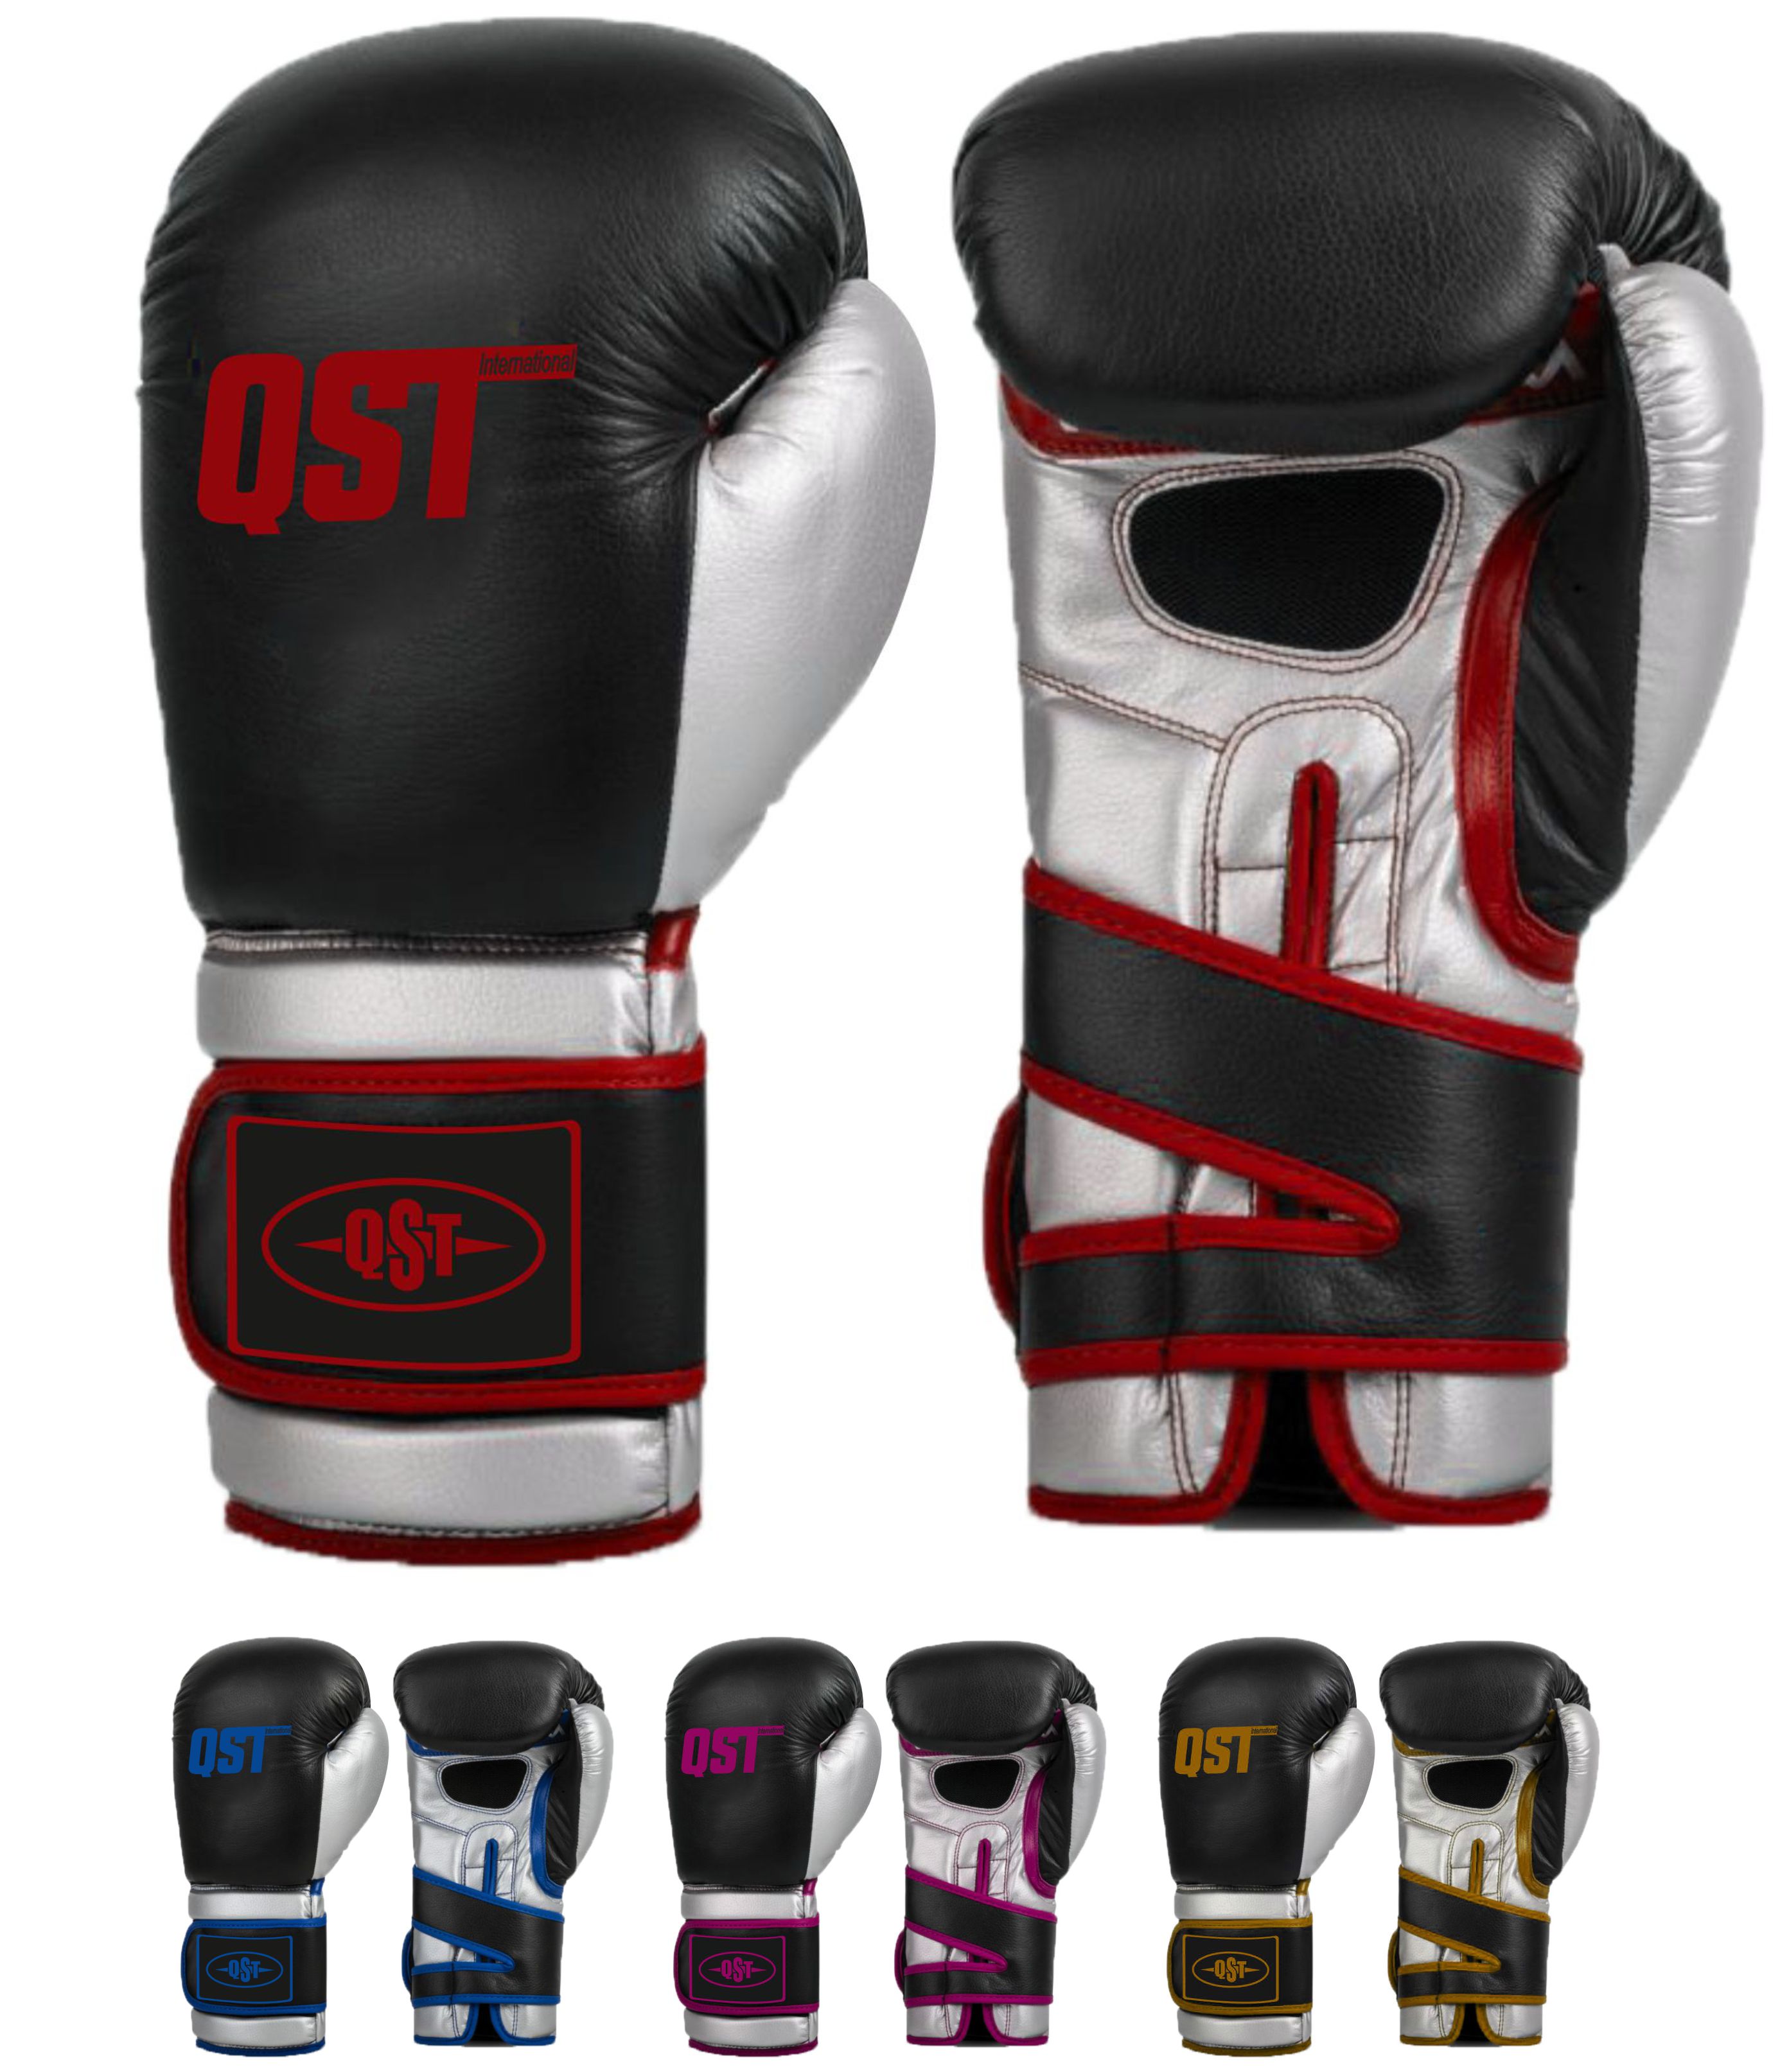 Professional Boxing Gloves - PRG-1503